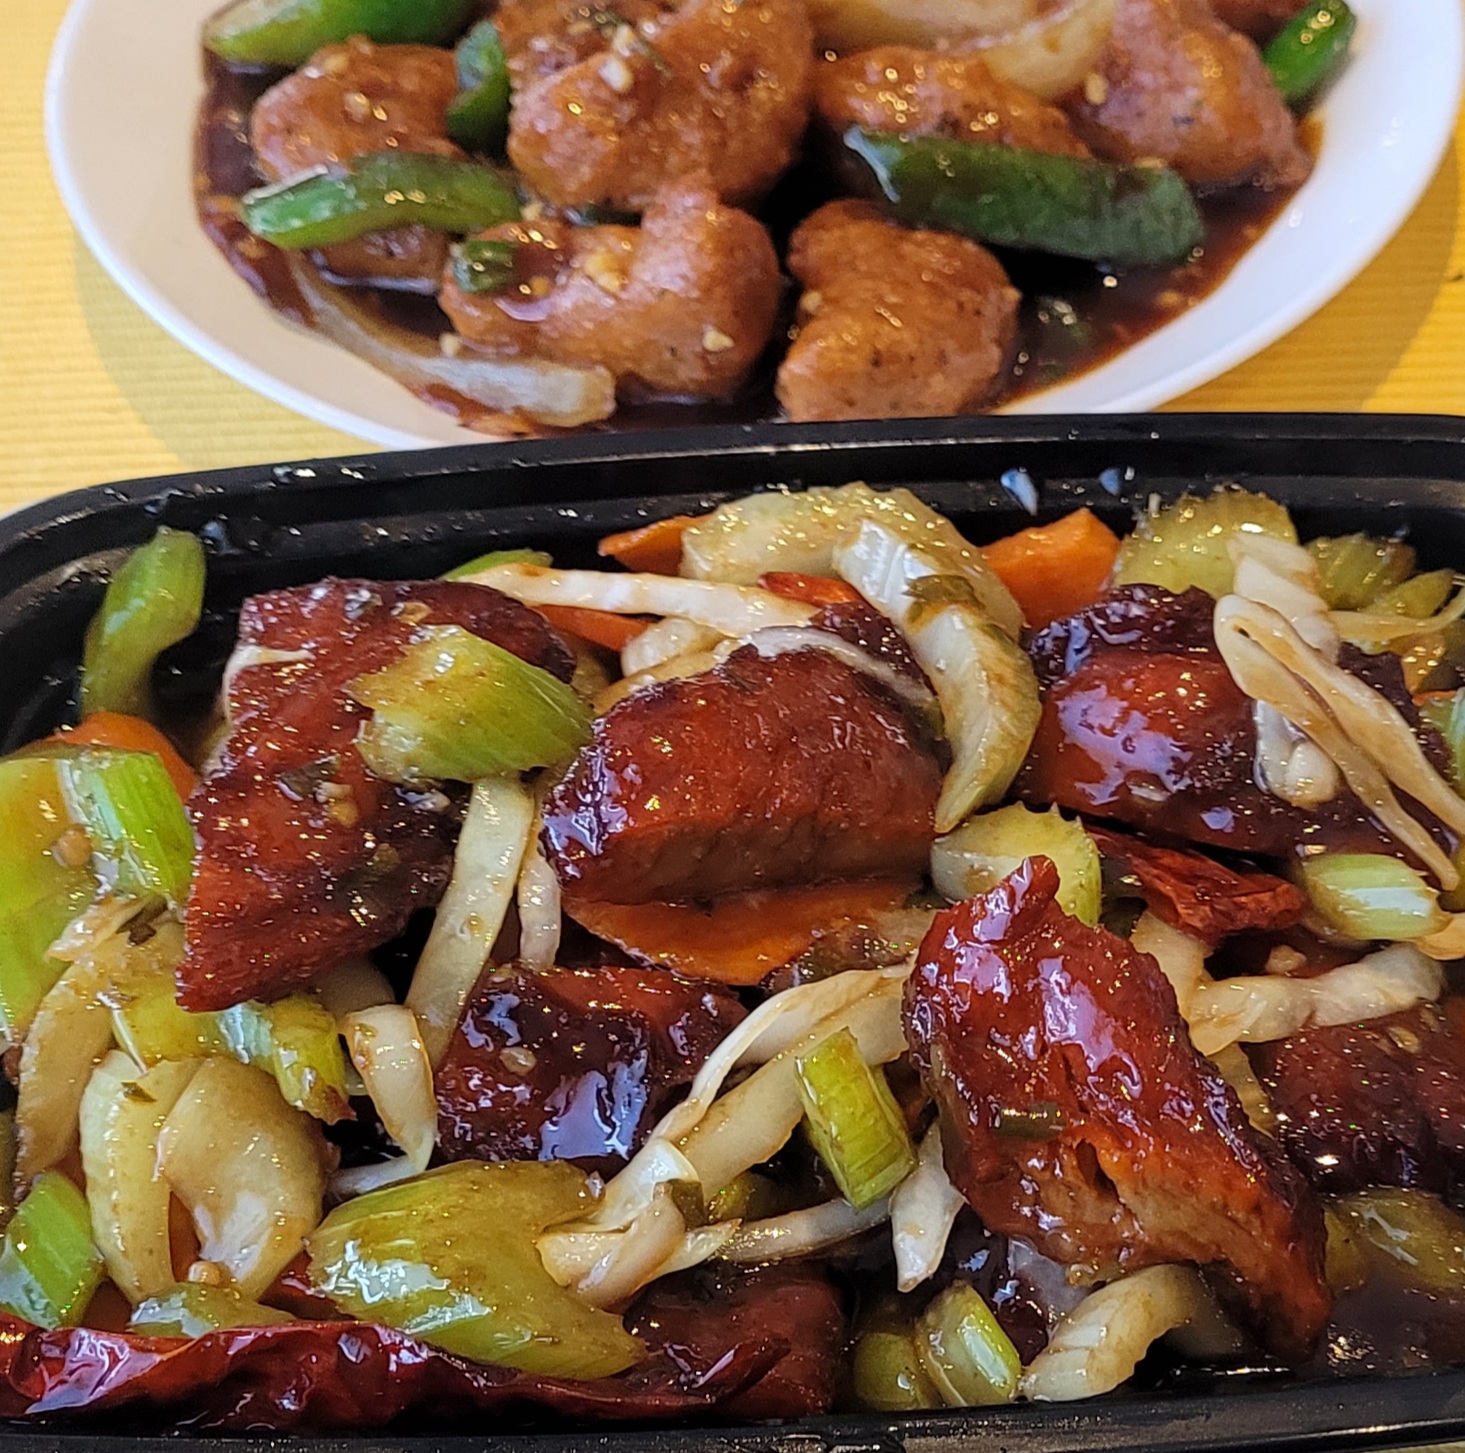 Ming Room - We offer delicious and gluten free Chinese food